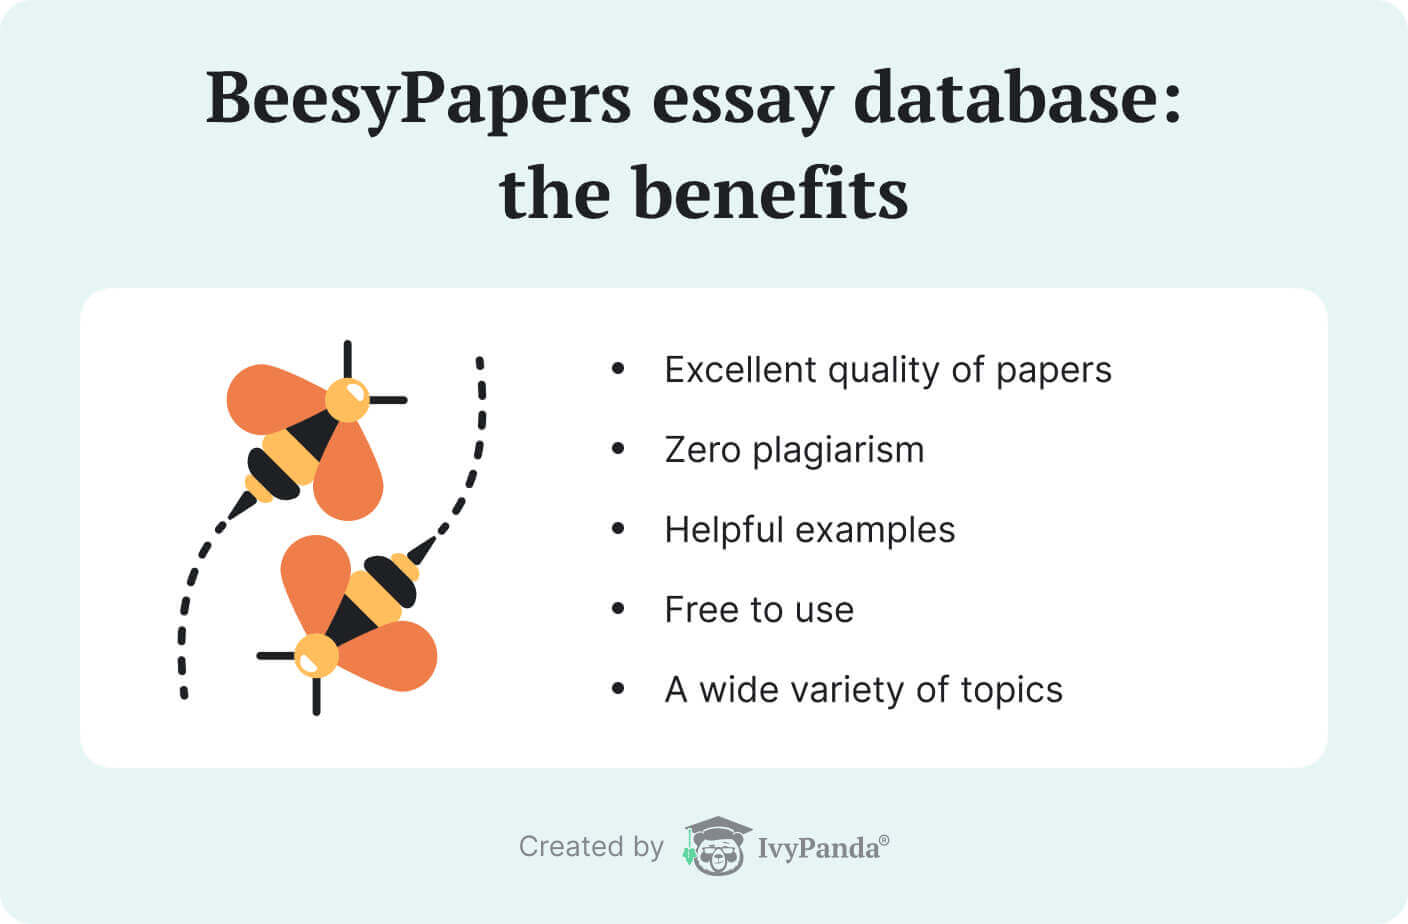 The picture lists the benefits of BeesyPapers essay database.